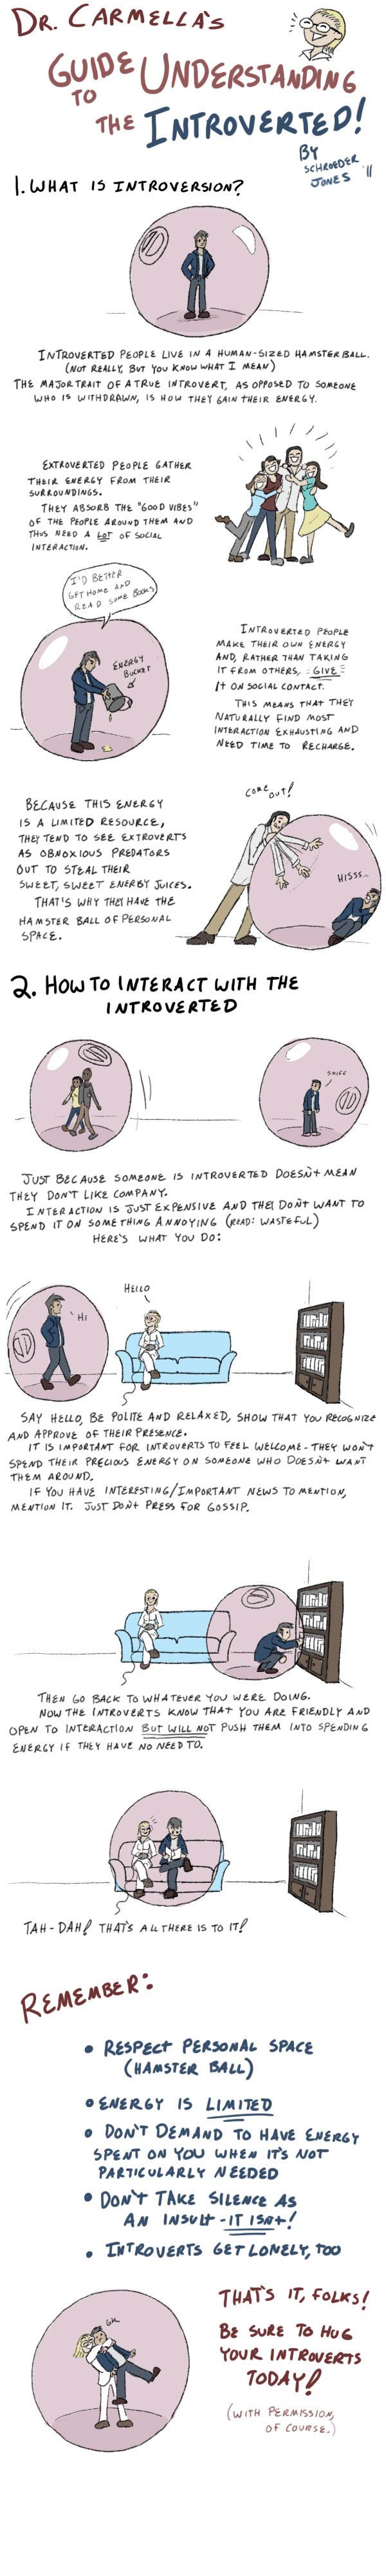 how_to_live_with_introverts_by_schrojones